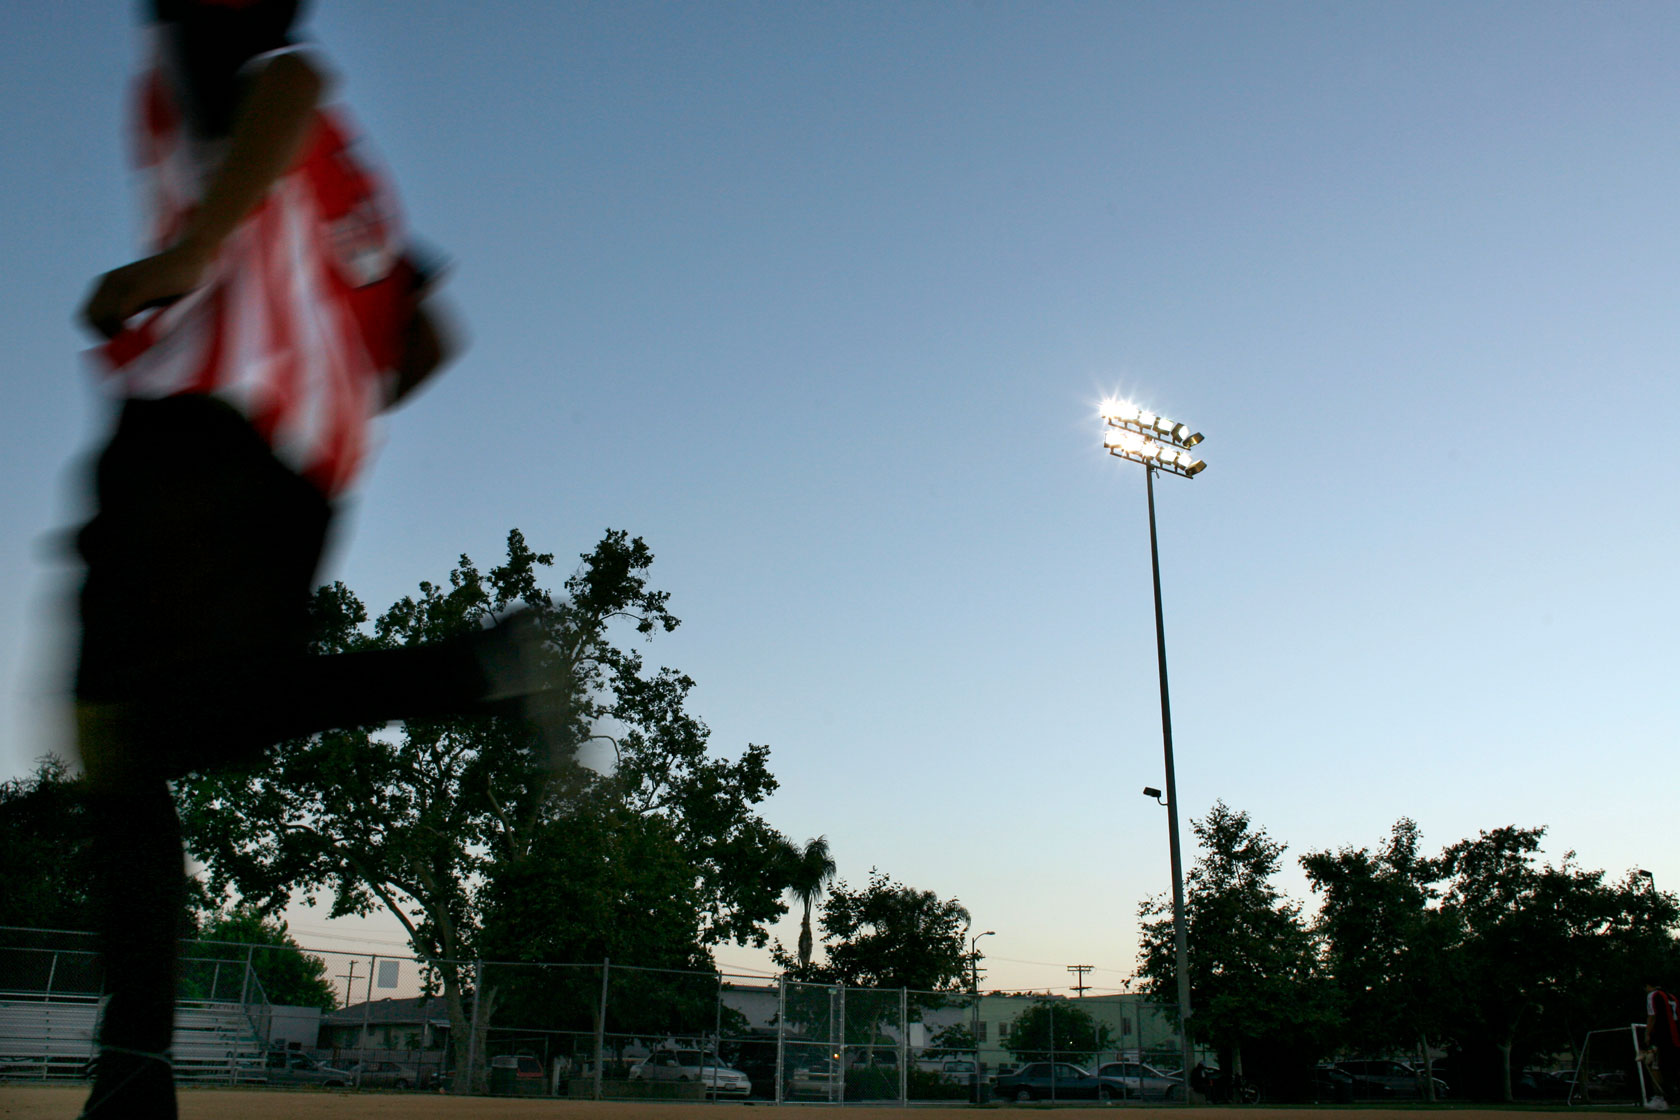 A boy runs by on a lit-up baseball field in the forefront at dusk.